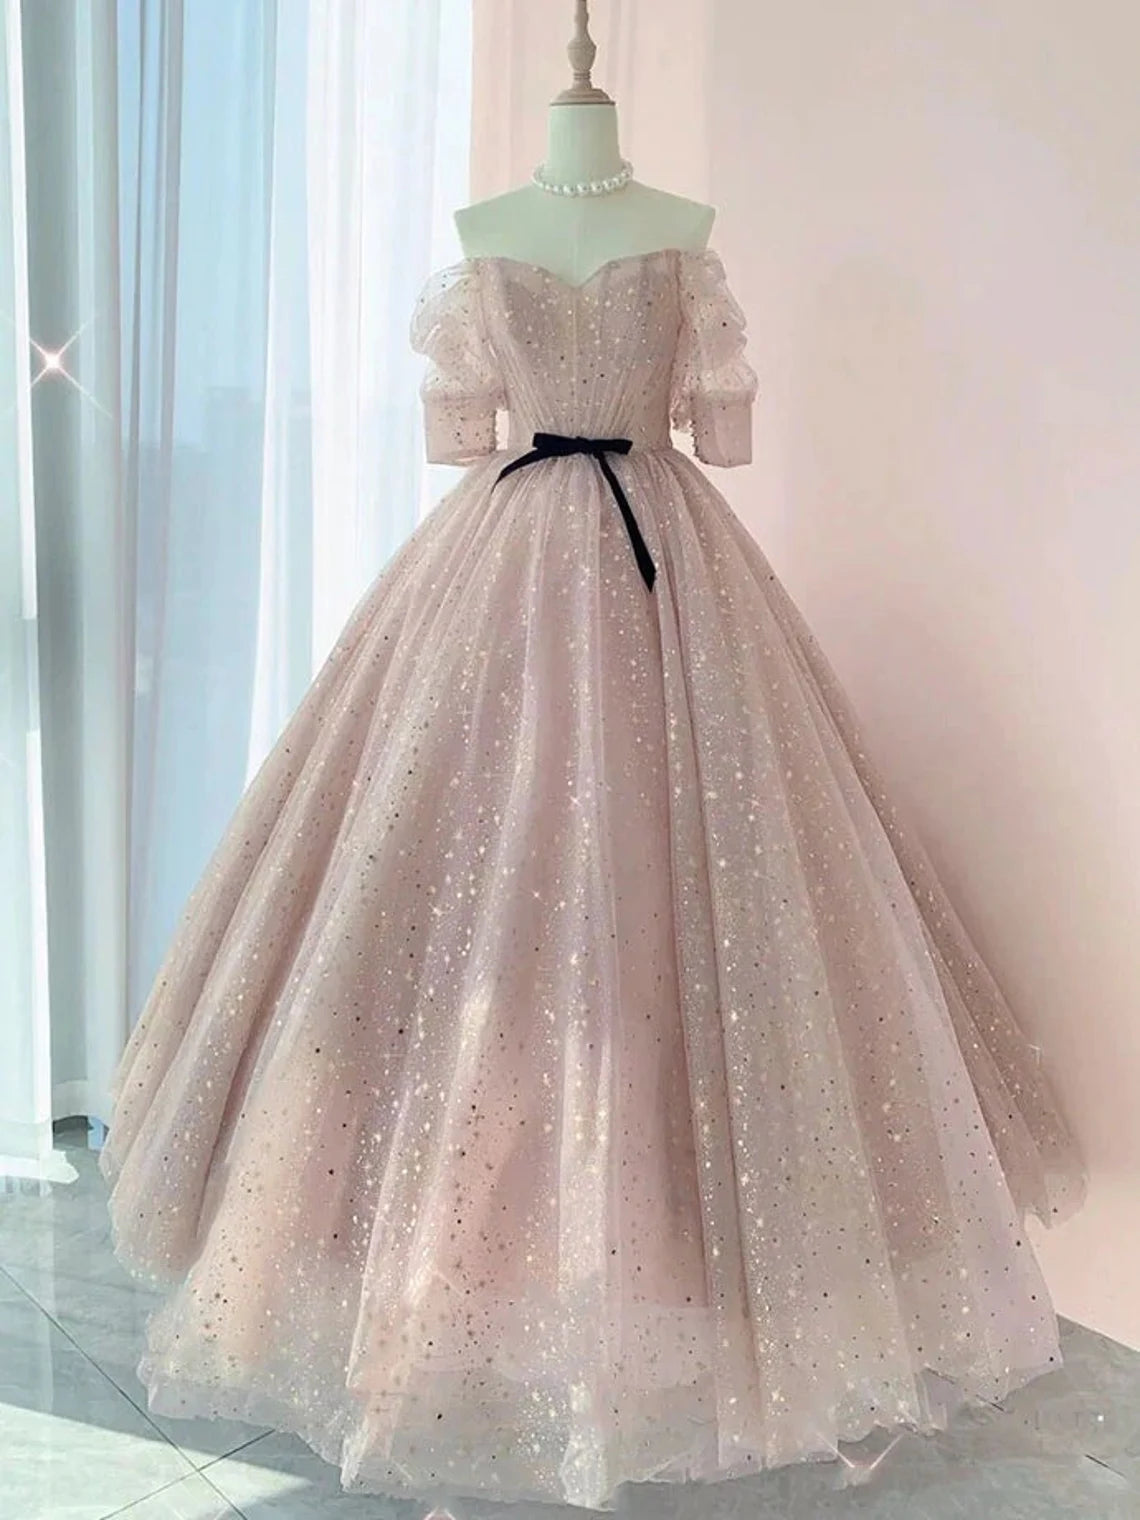 Homecoming Dresses Shop, Pink Sweetheart-Neck Tulle Lace Half-Sleeve Prom Dresses, Pink Party Dress